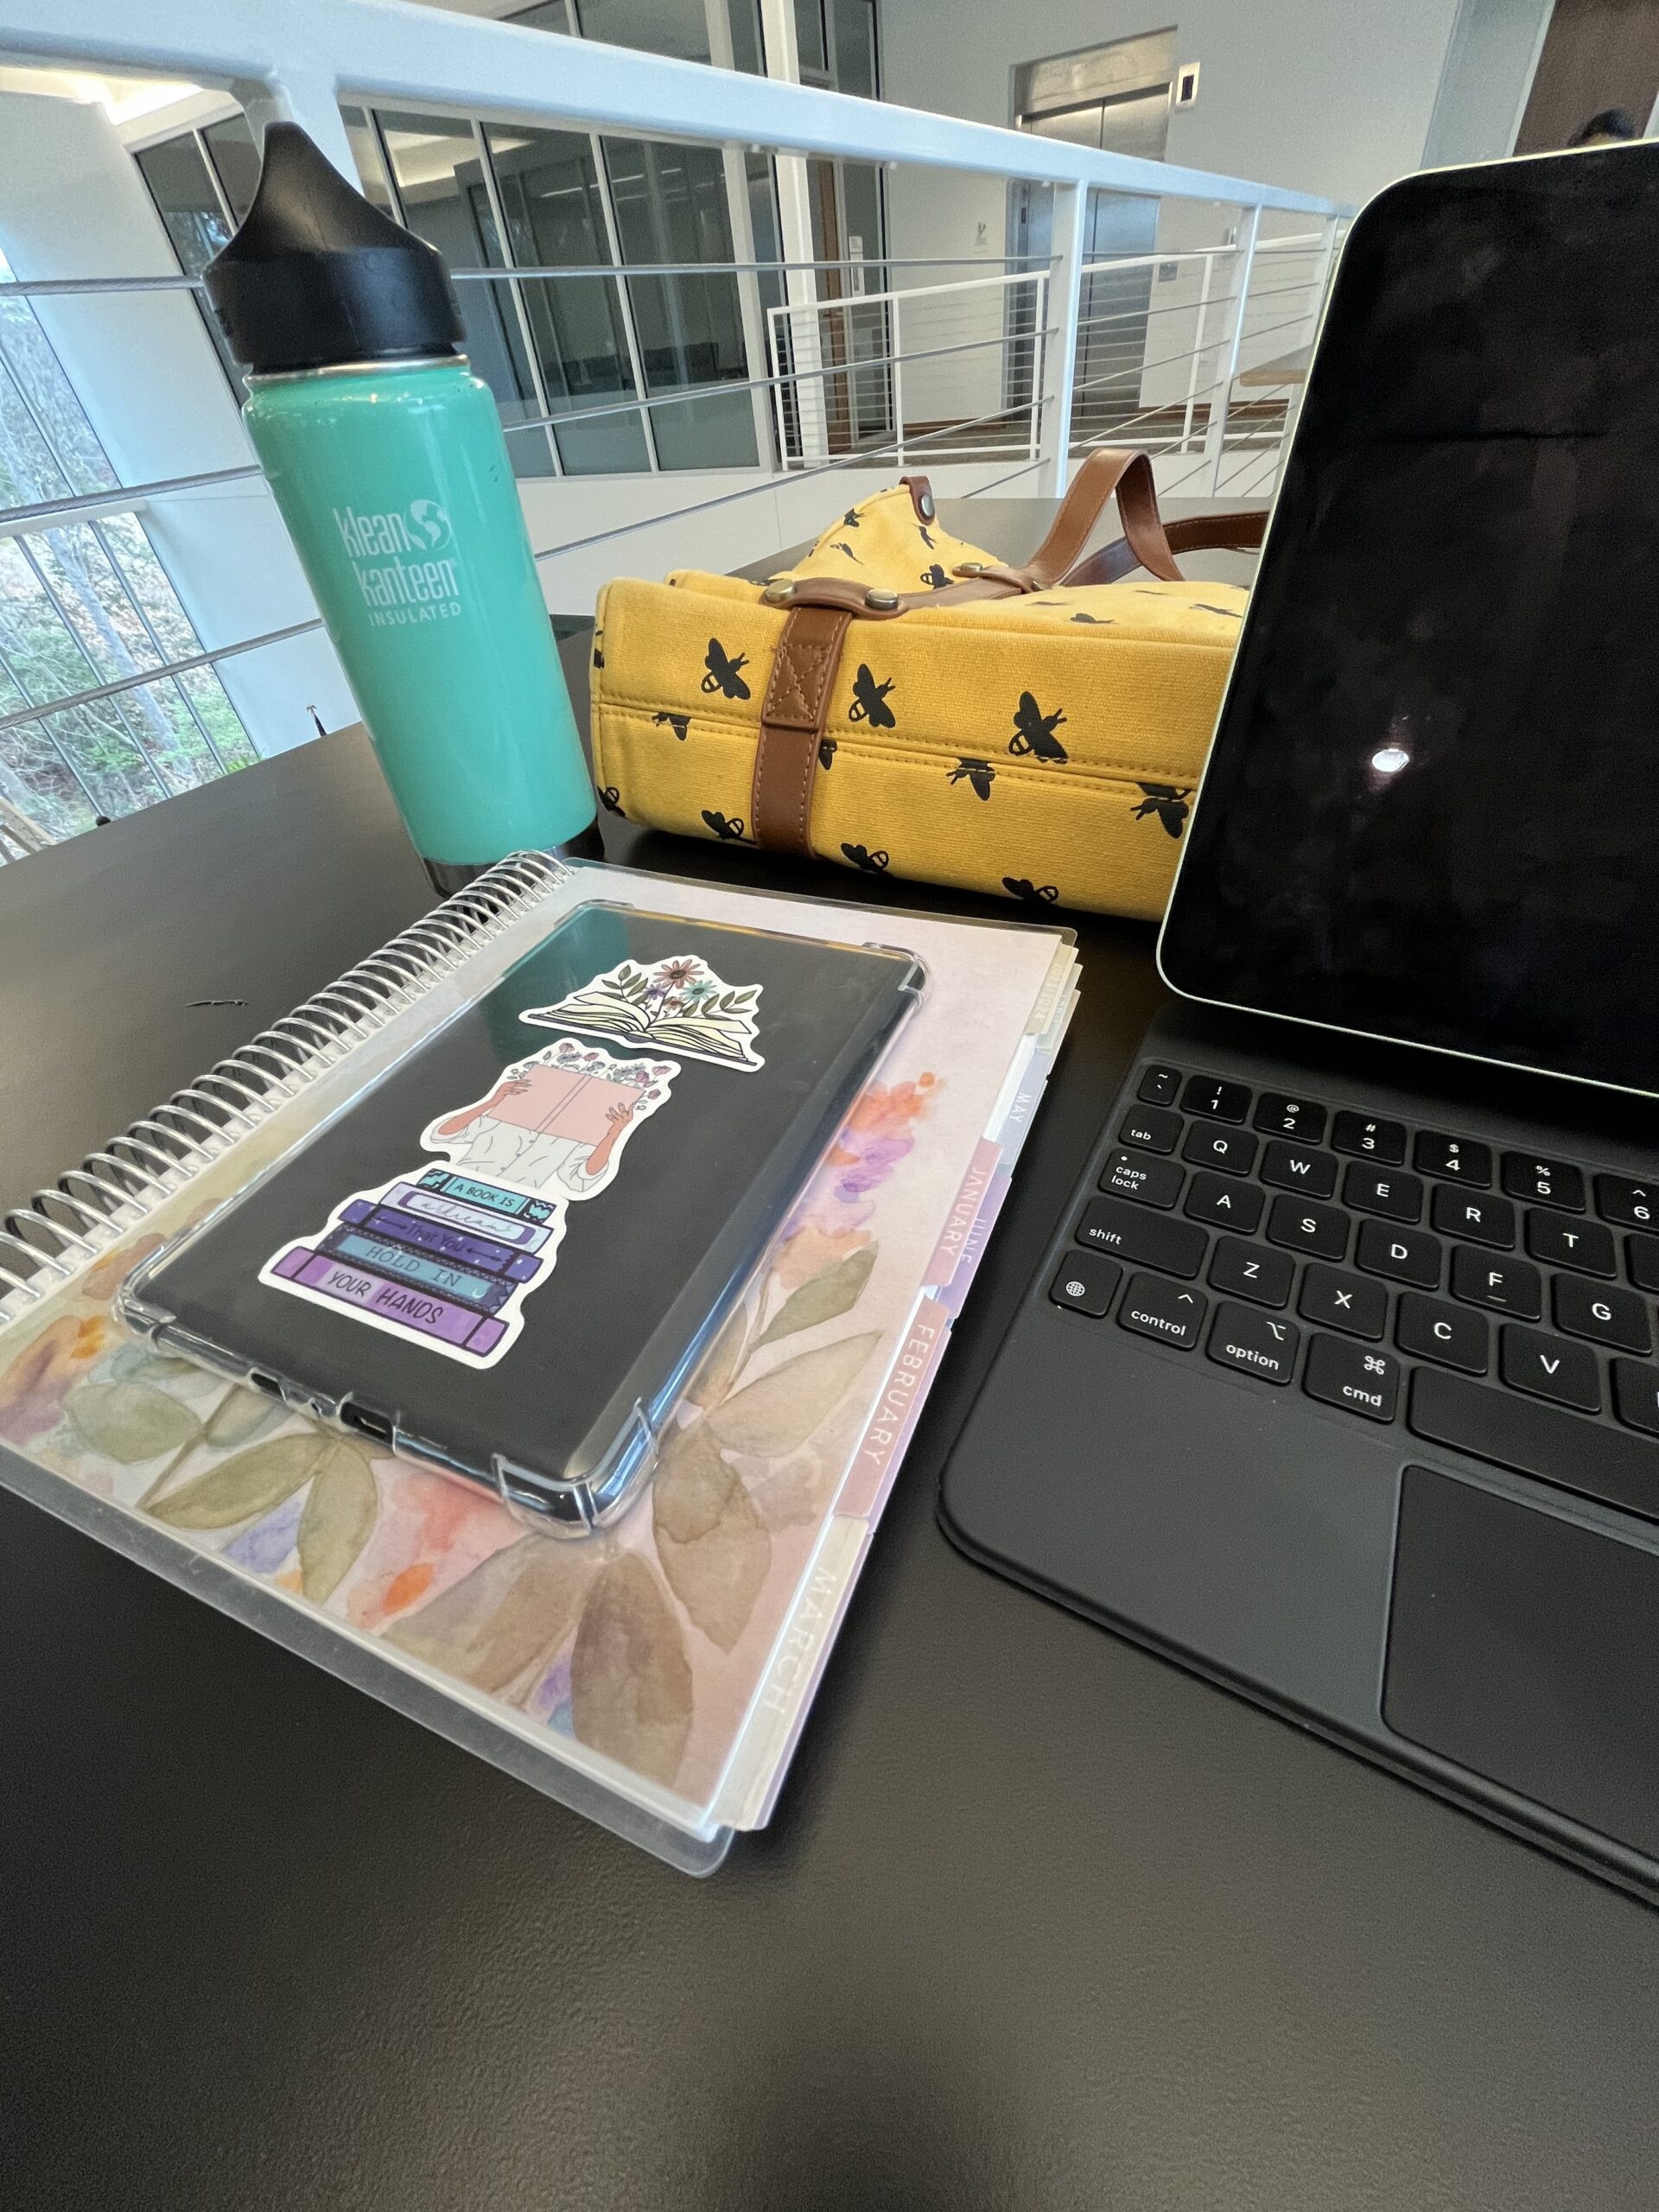 Picture of Lindsey's writing necessities, including laptop, planner, Kindle, water bottle, and purse.